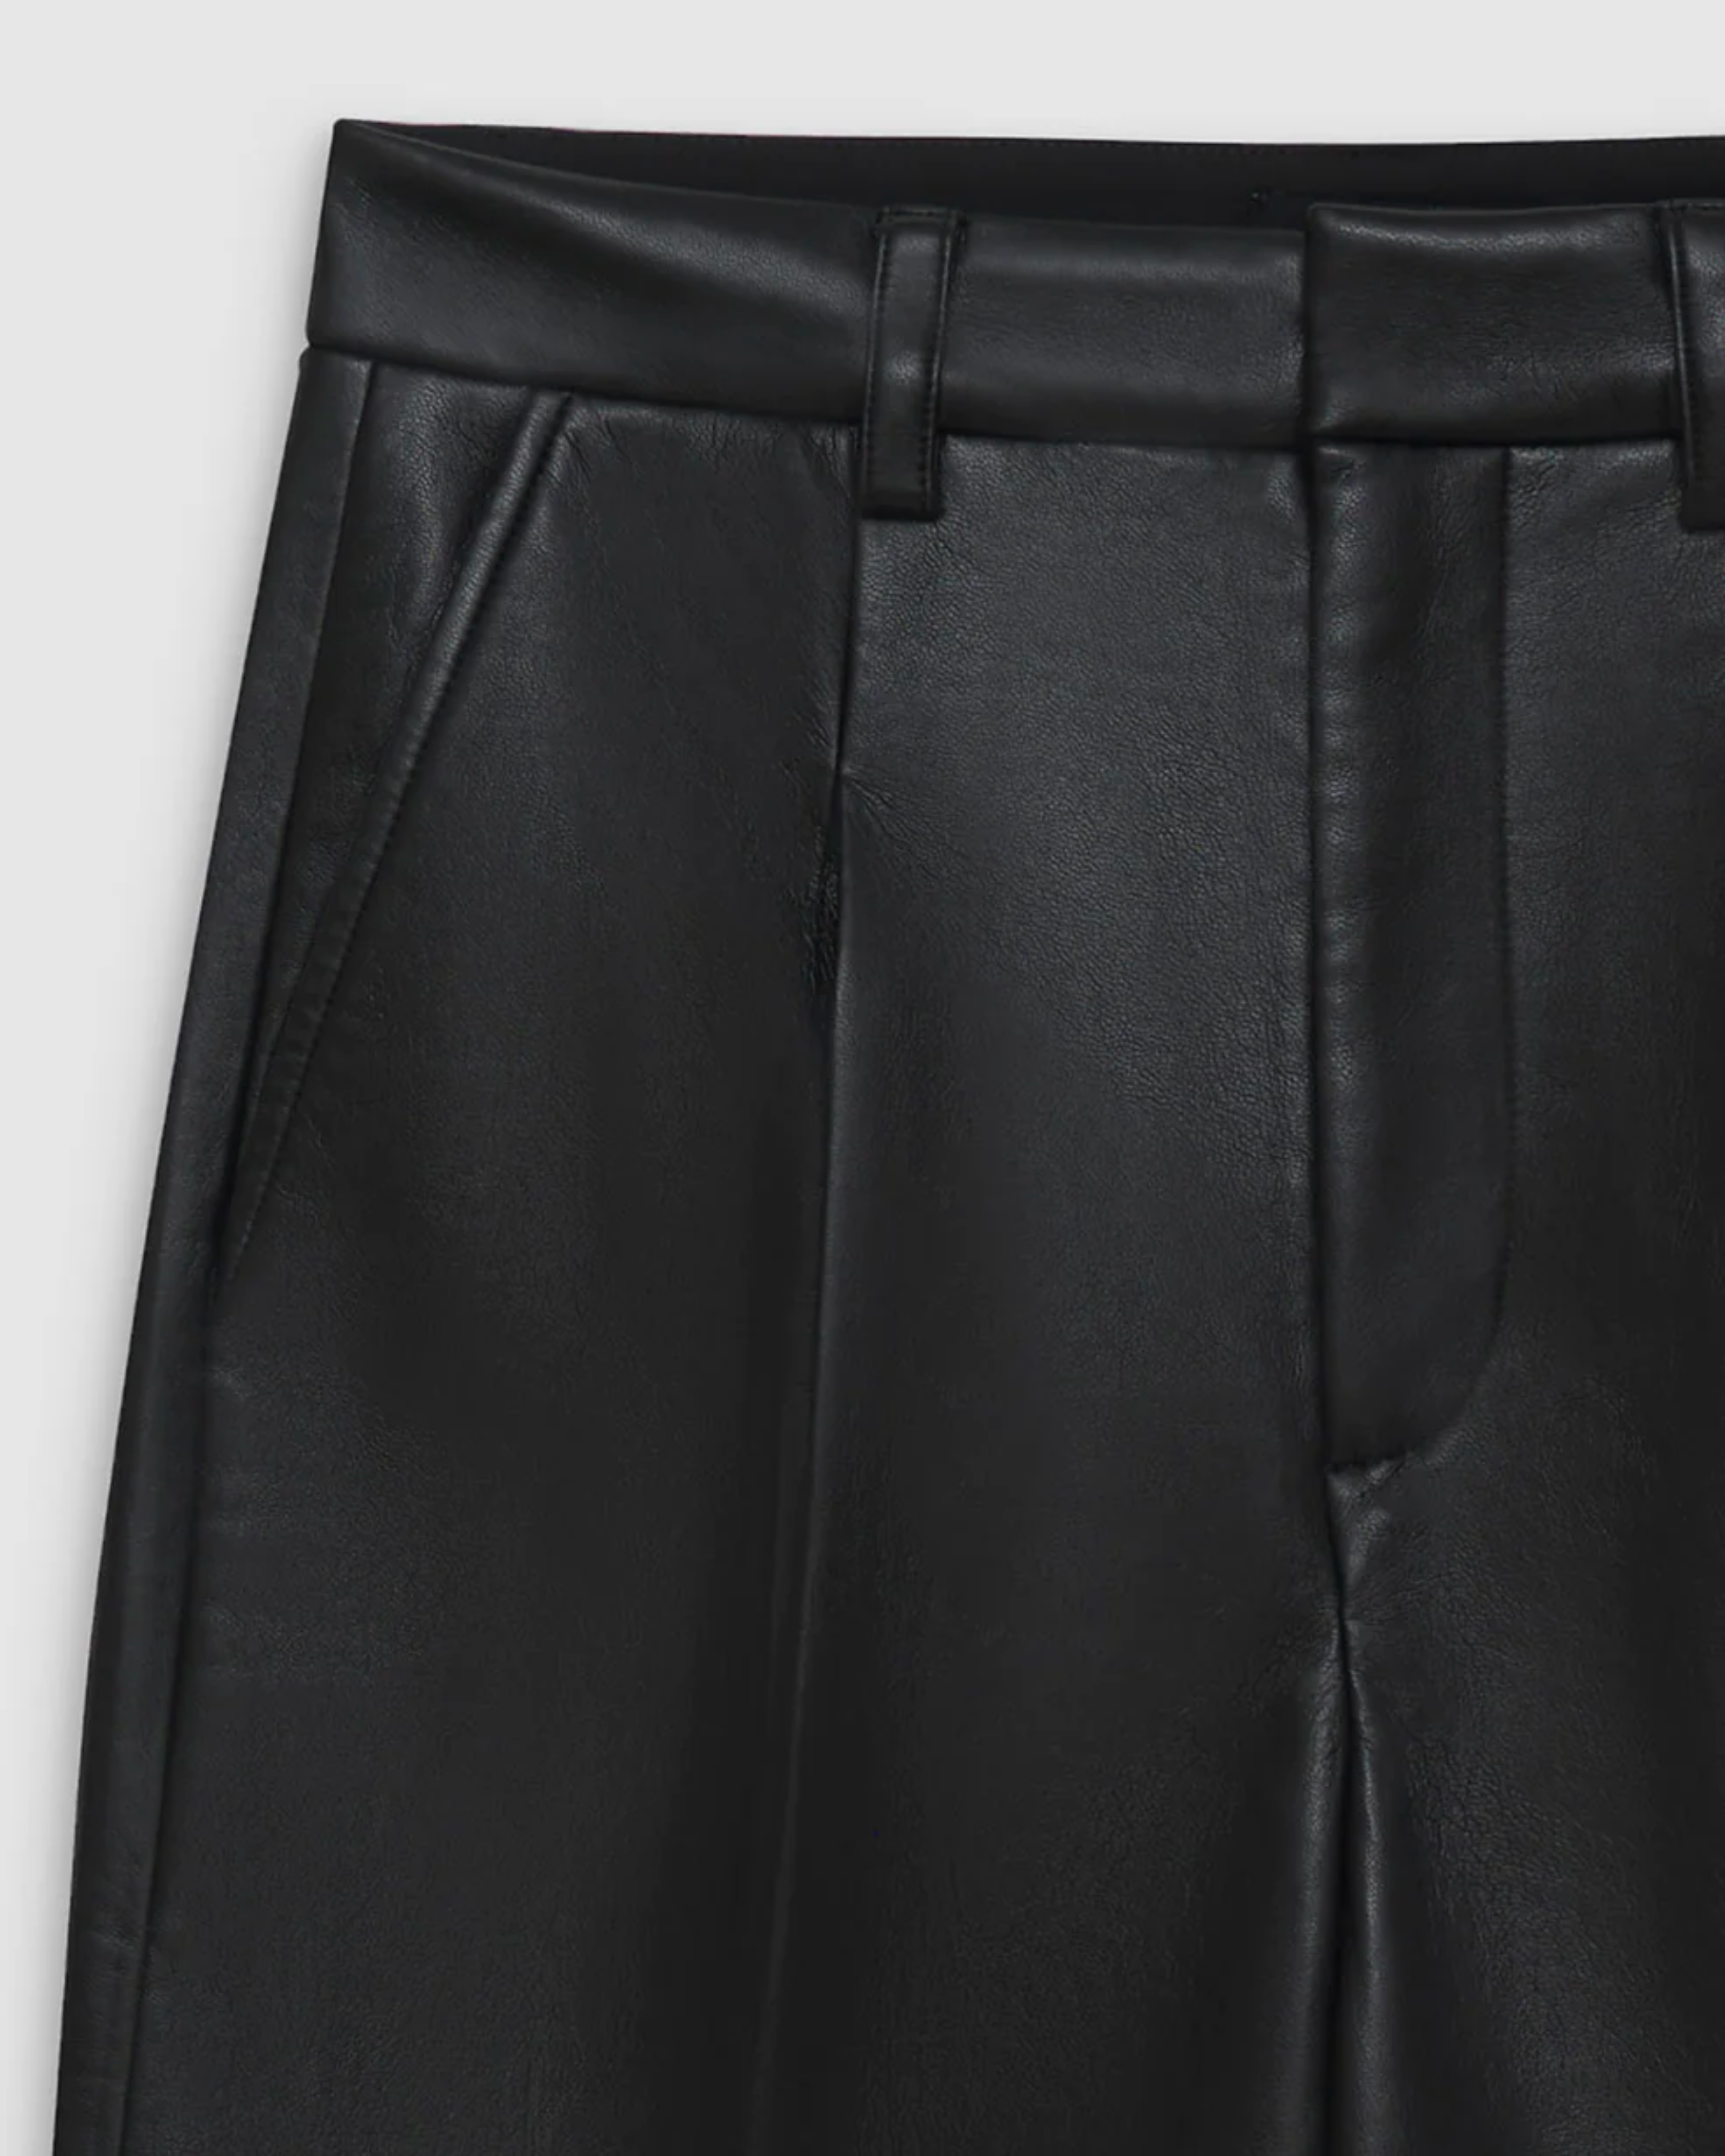 Anine Bing Carmen Pant in Black Recycled Leather